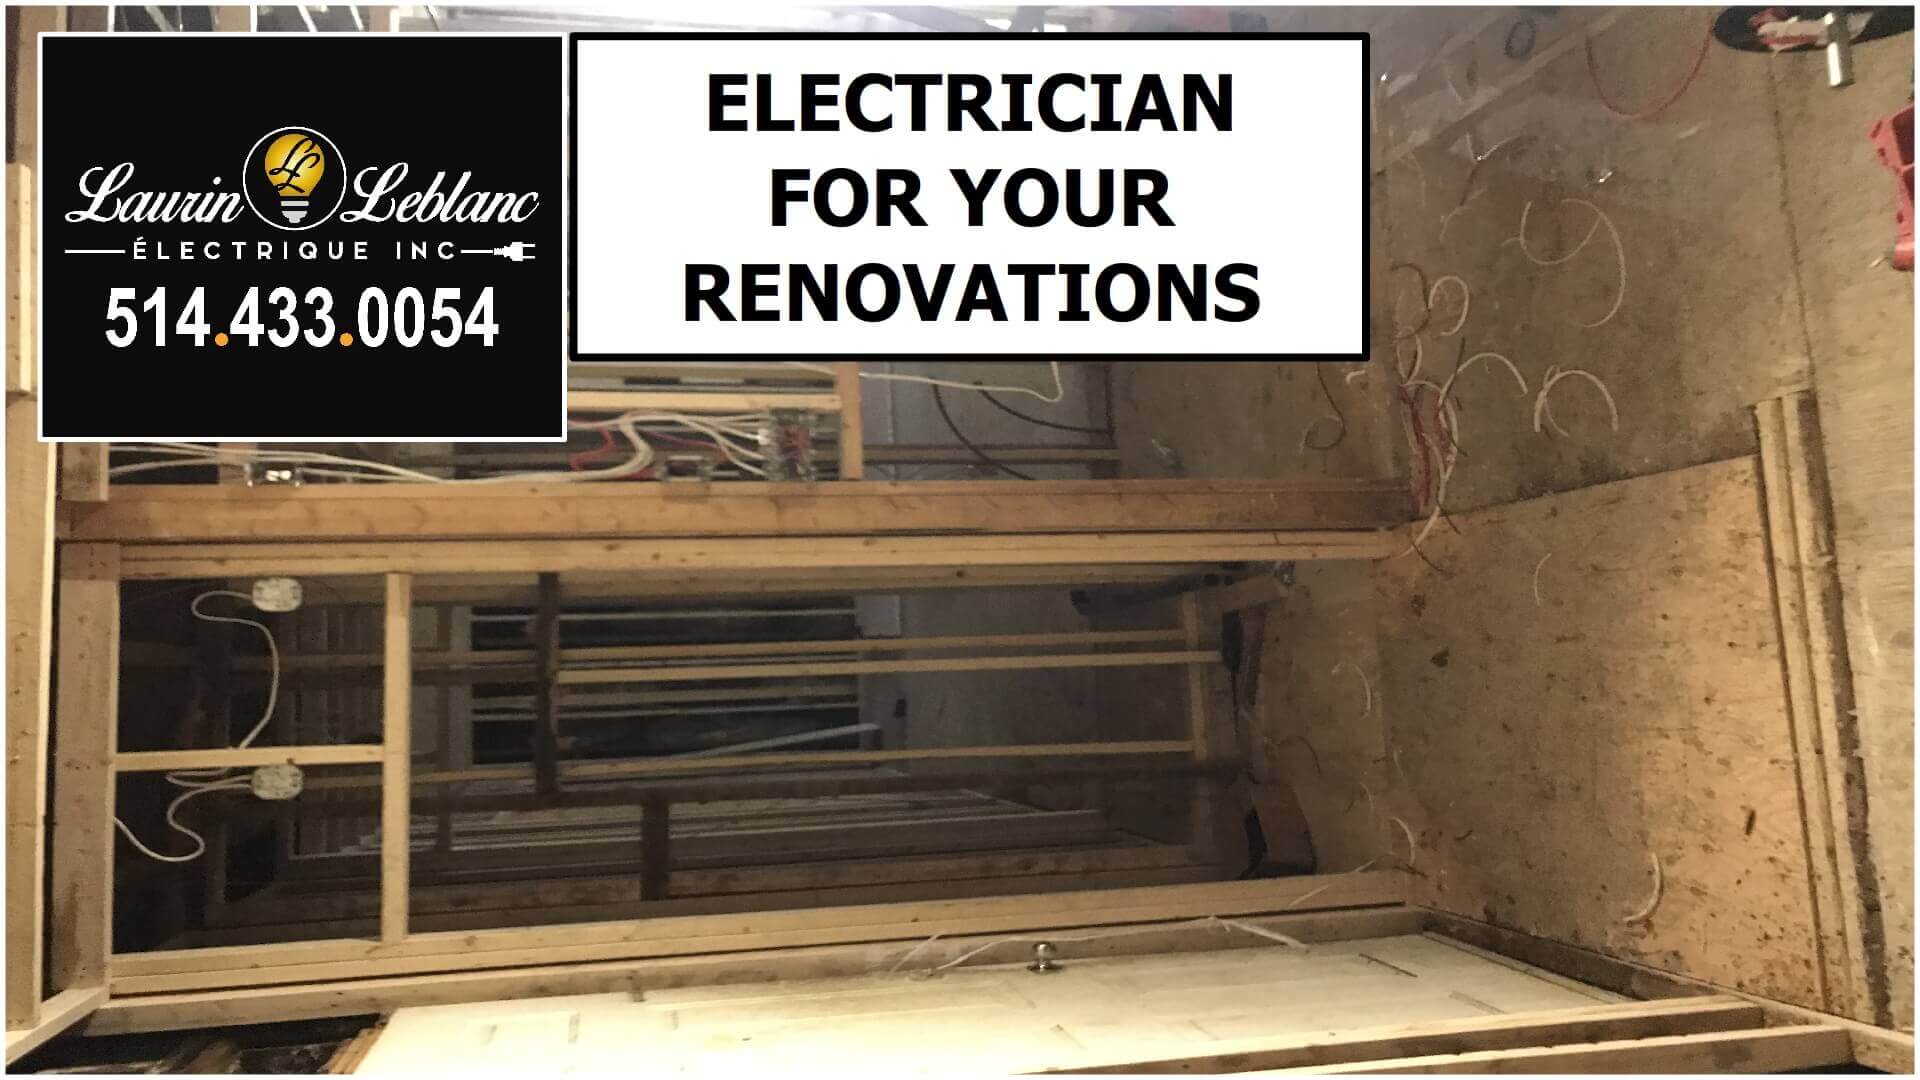 Electrician Renovations in Chomedey